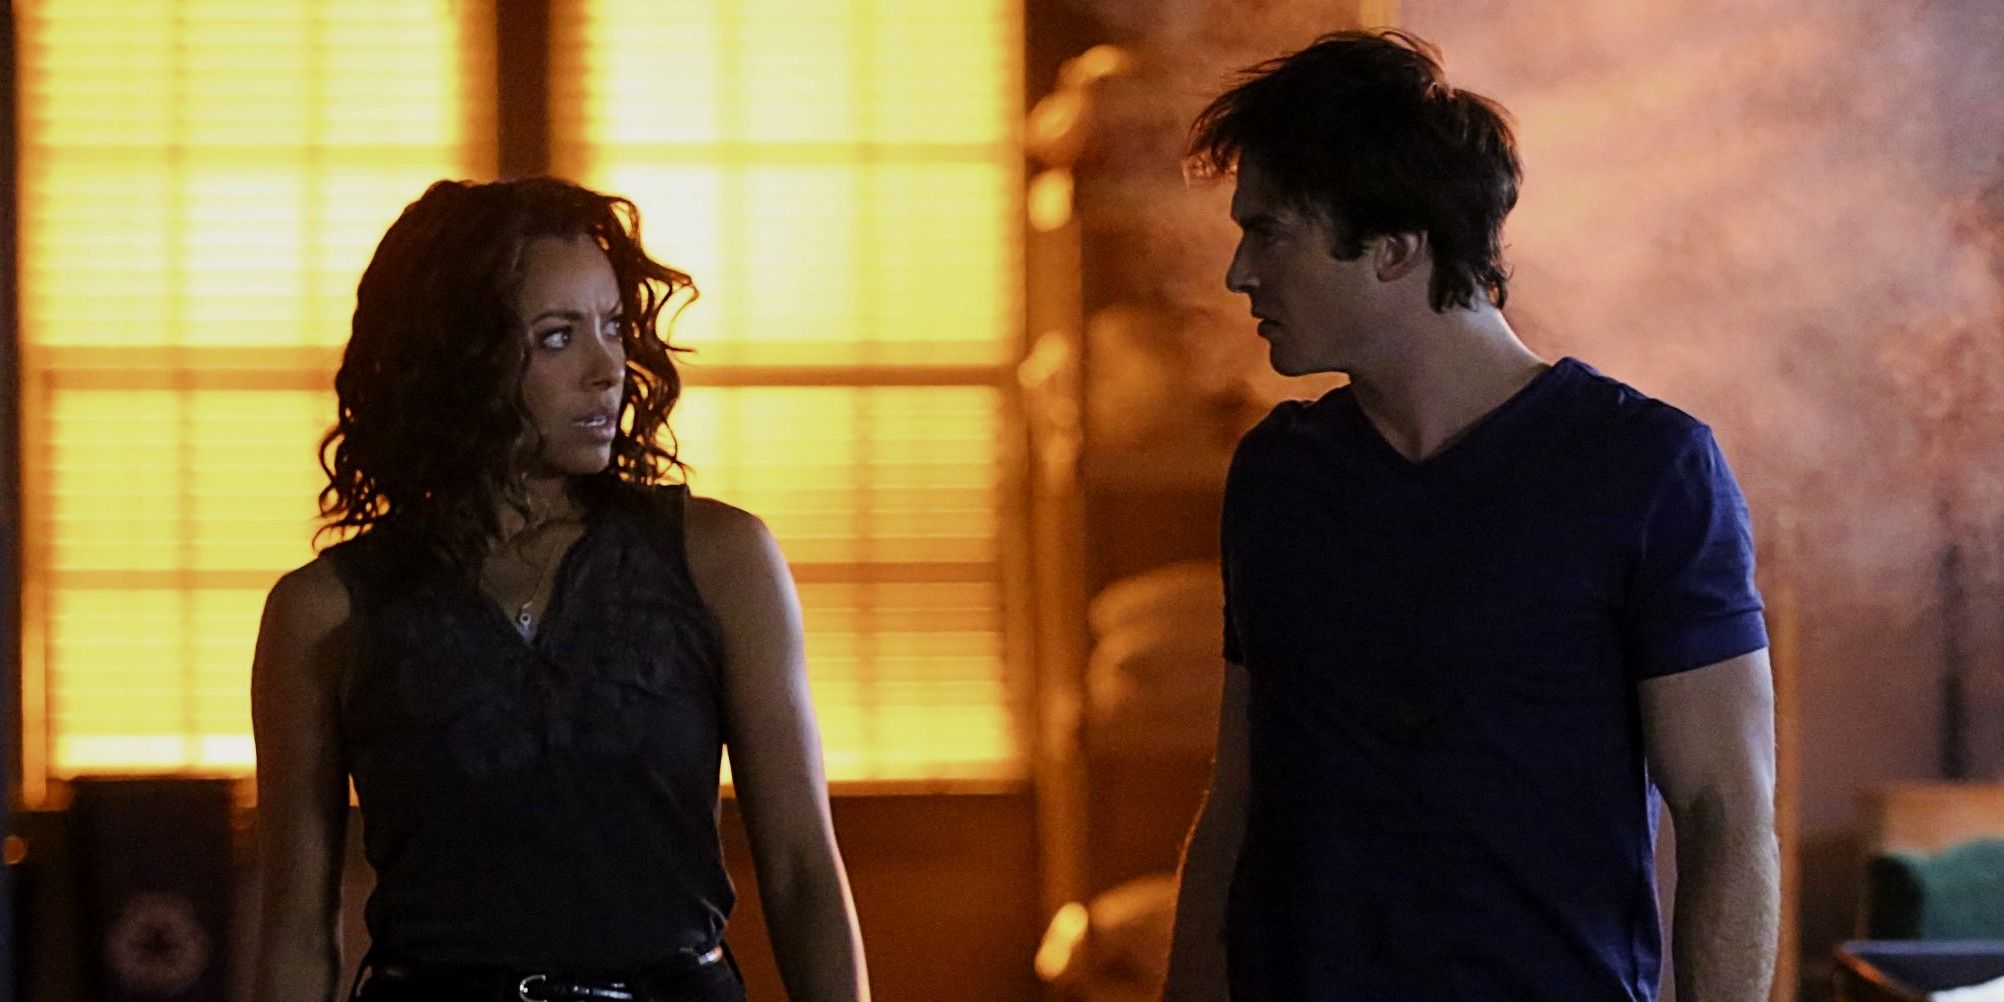 Bonnie and Damon talking in The Vampire Diaries